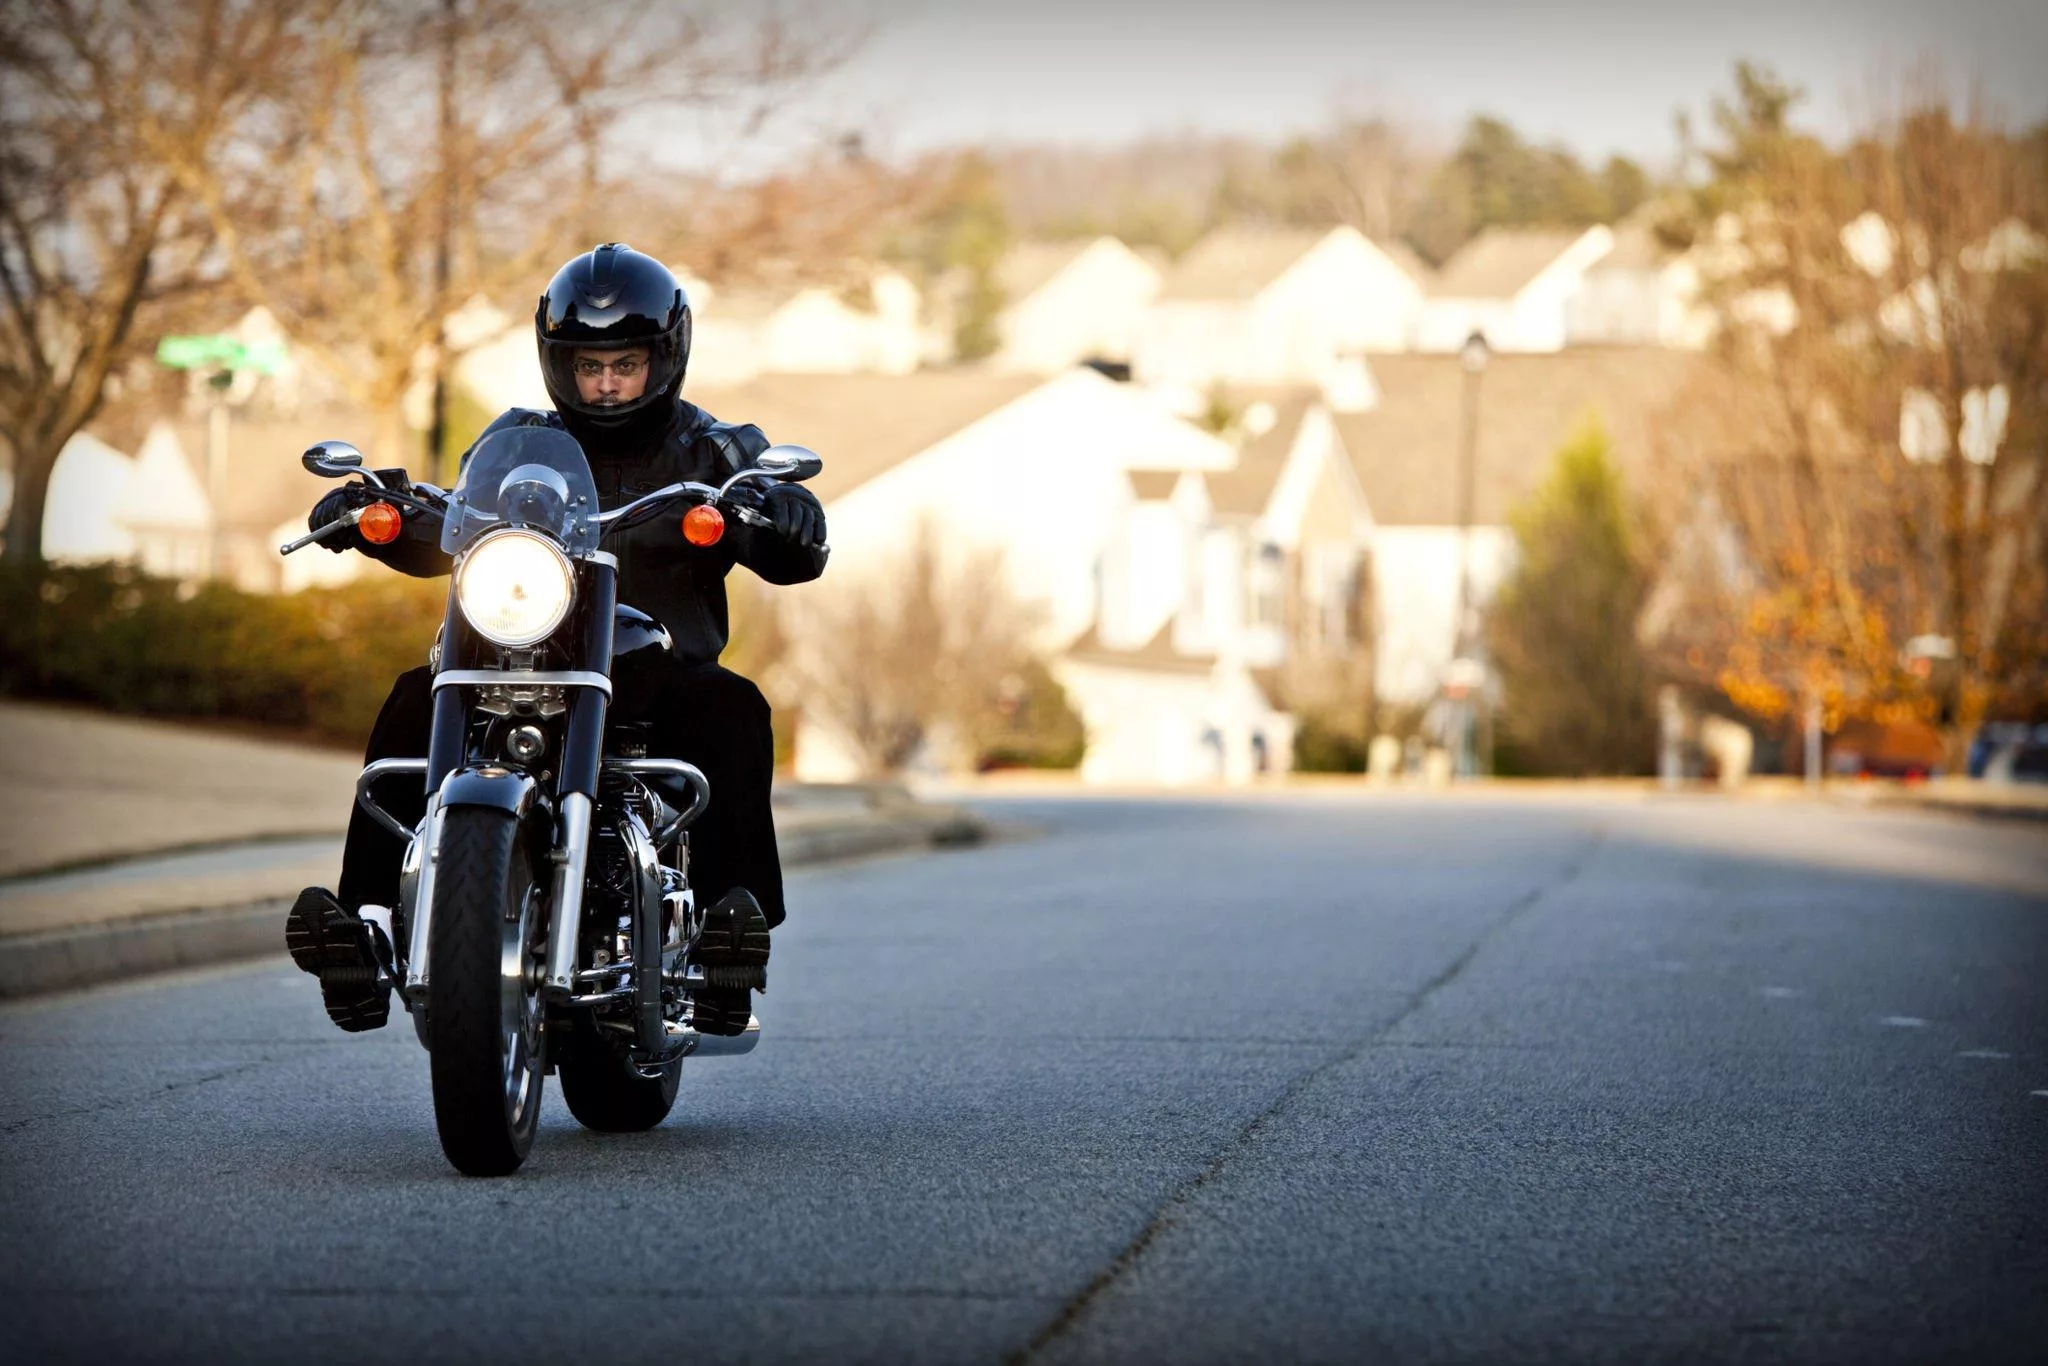 Legal Rights and Responsibilities of Motorcyclists